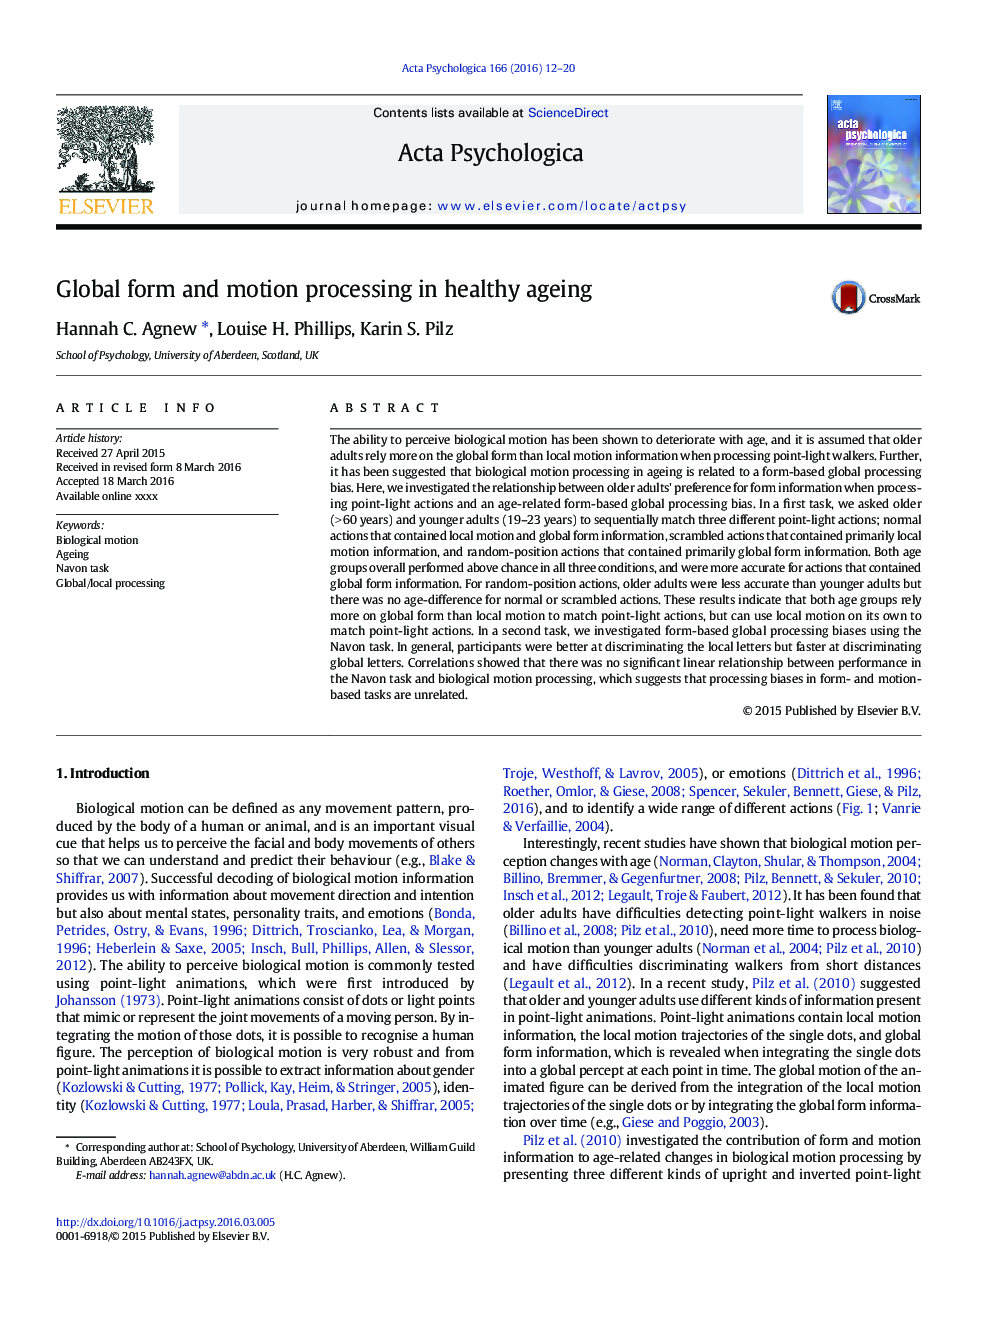 Global form and motion processing in healthy ageing